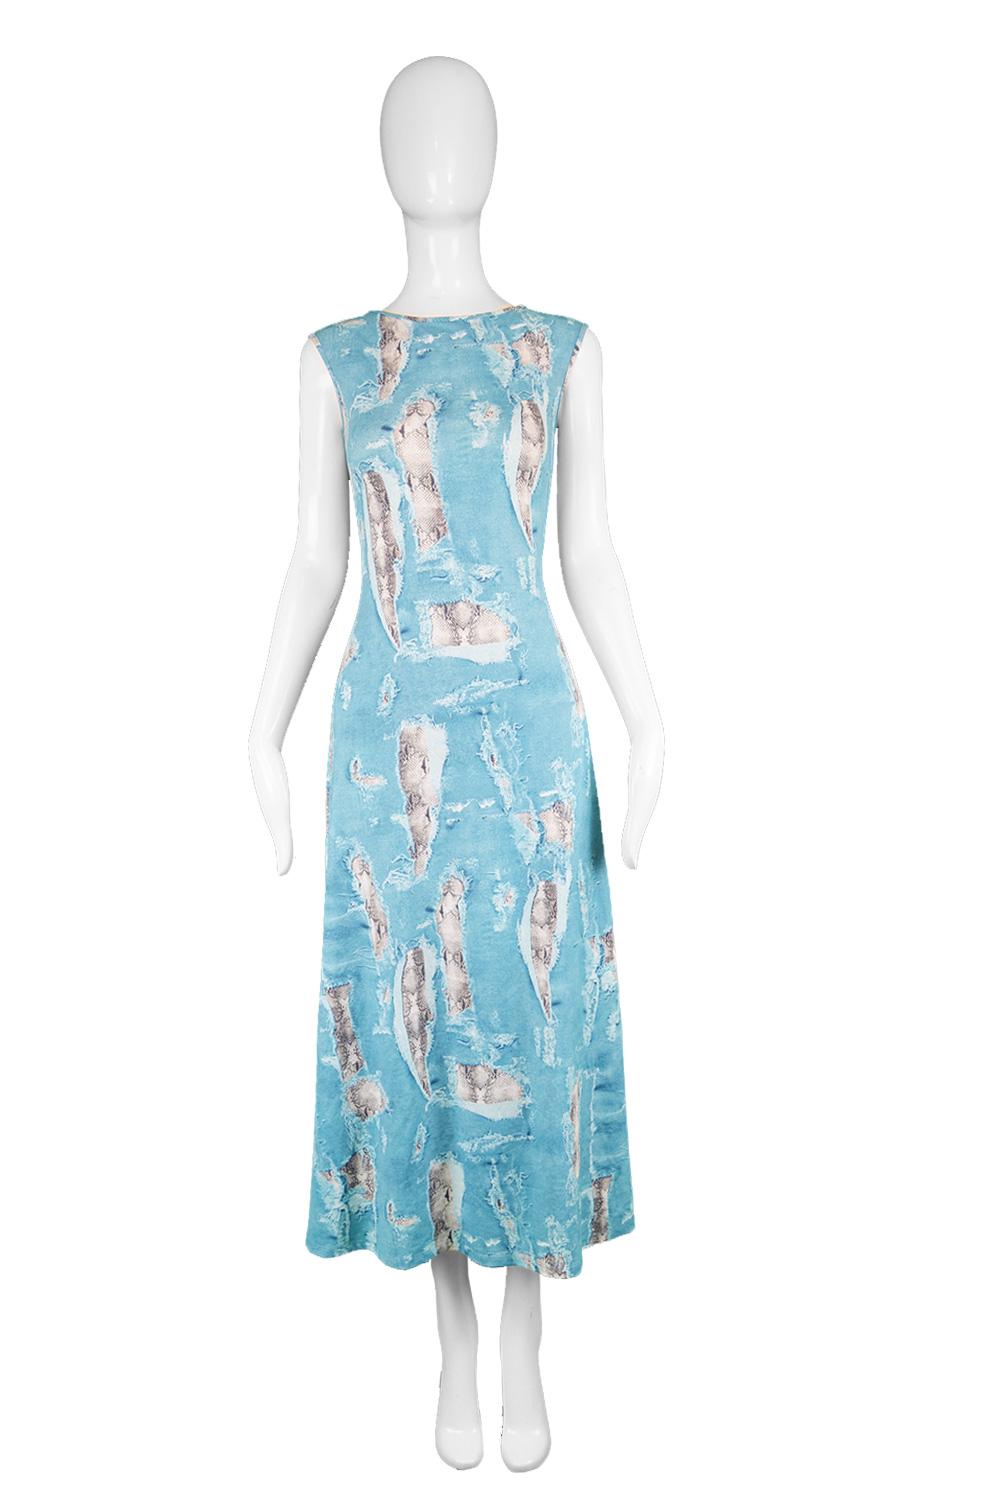 An edgy vintage dress from the 90s by luxury Italian fashion house, Krizia. In a light blue stretch jersey fabric with a trompe l'oeil print of torn denim and snakeskin pattern throughout. The stretchy elastane means the jersey clings to your curves